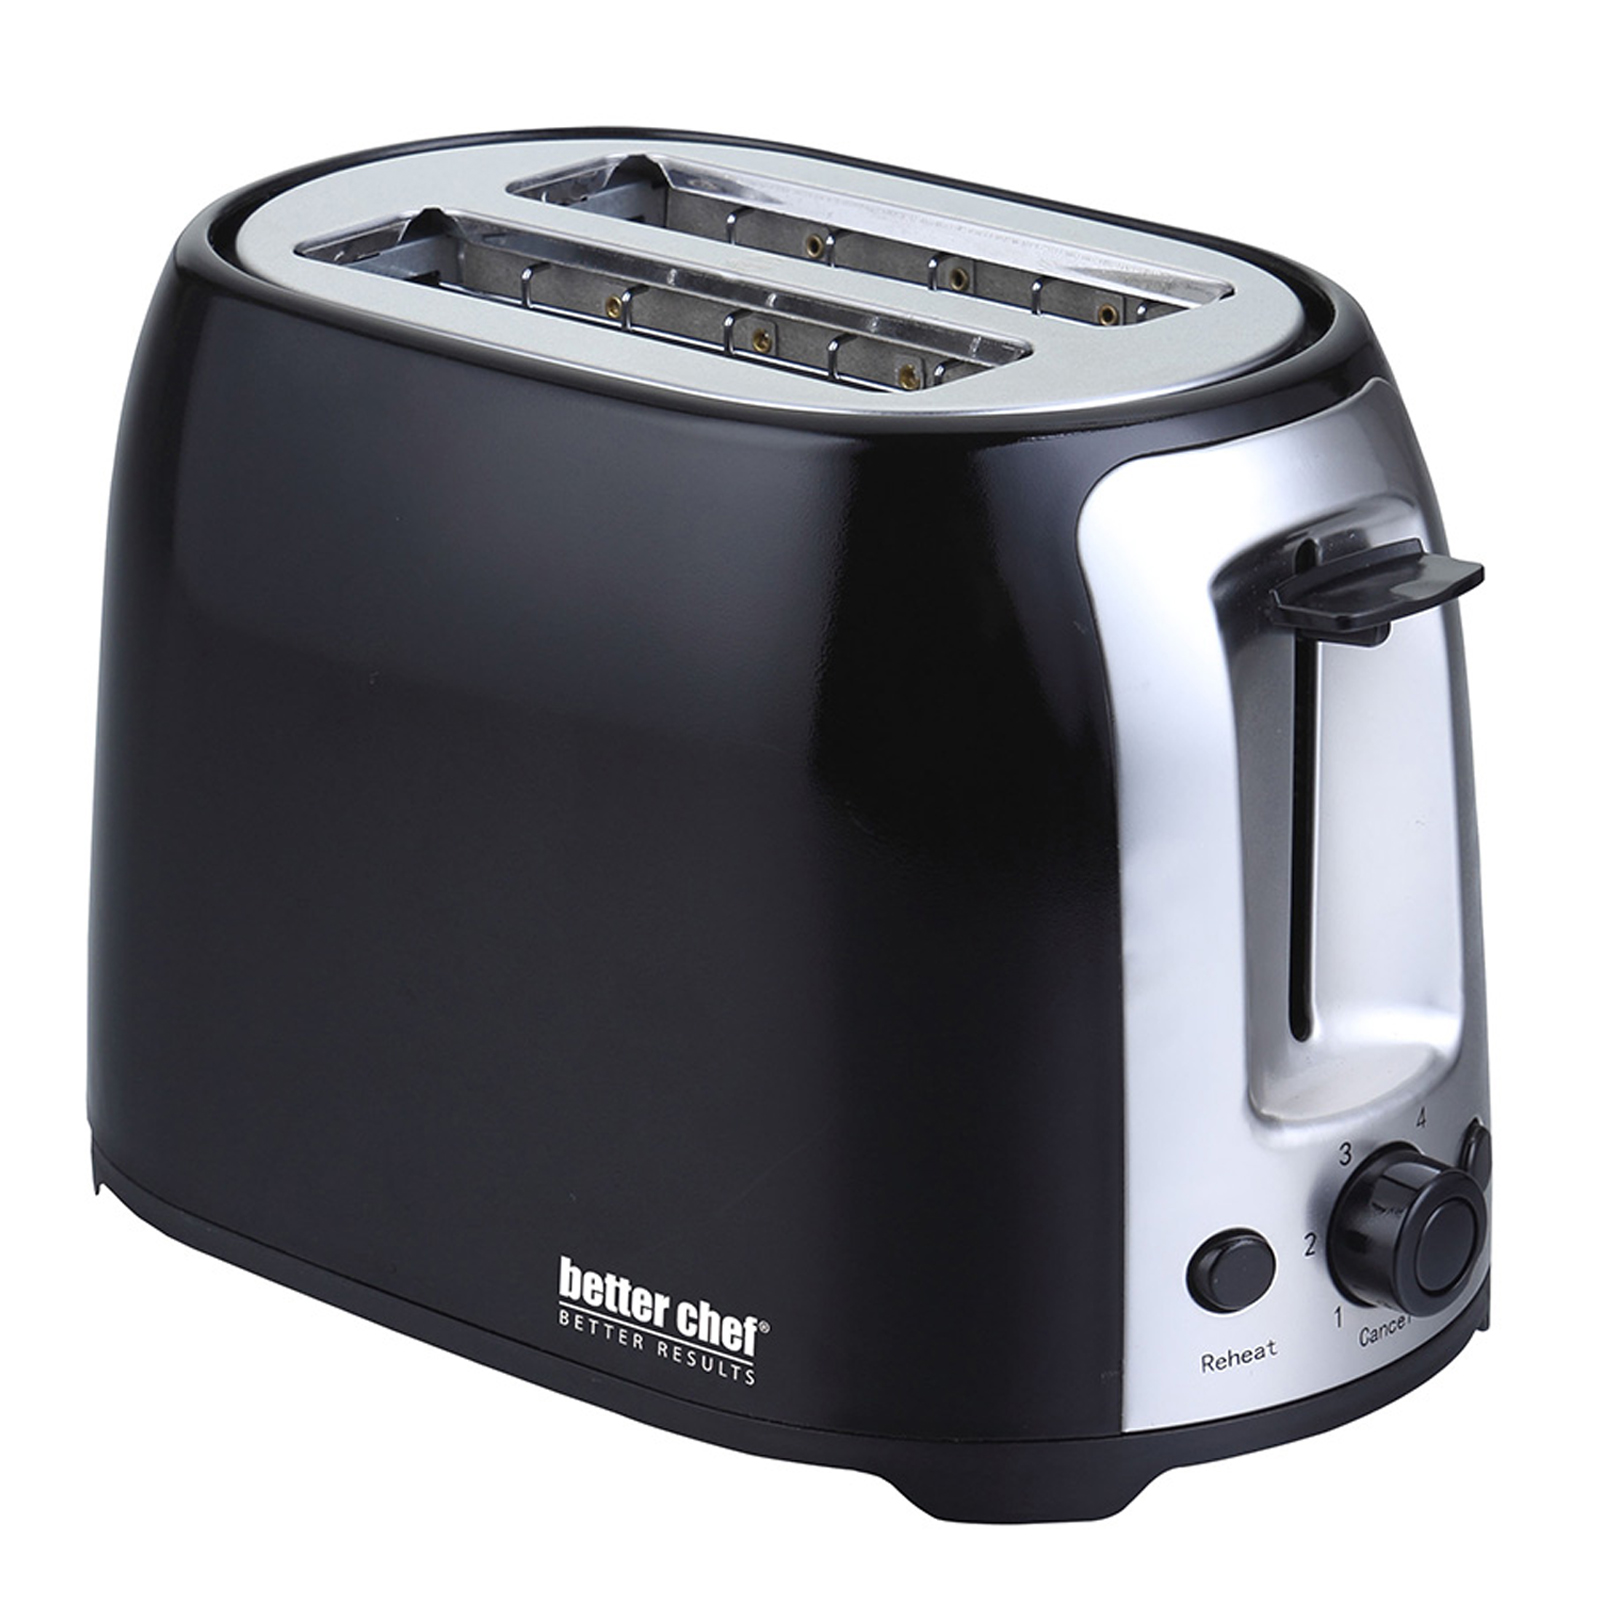 Better Chef 97095026M Cool Touch 2-Slice Toaster with Wide Slots - Black